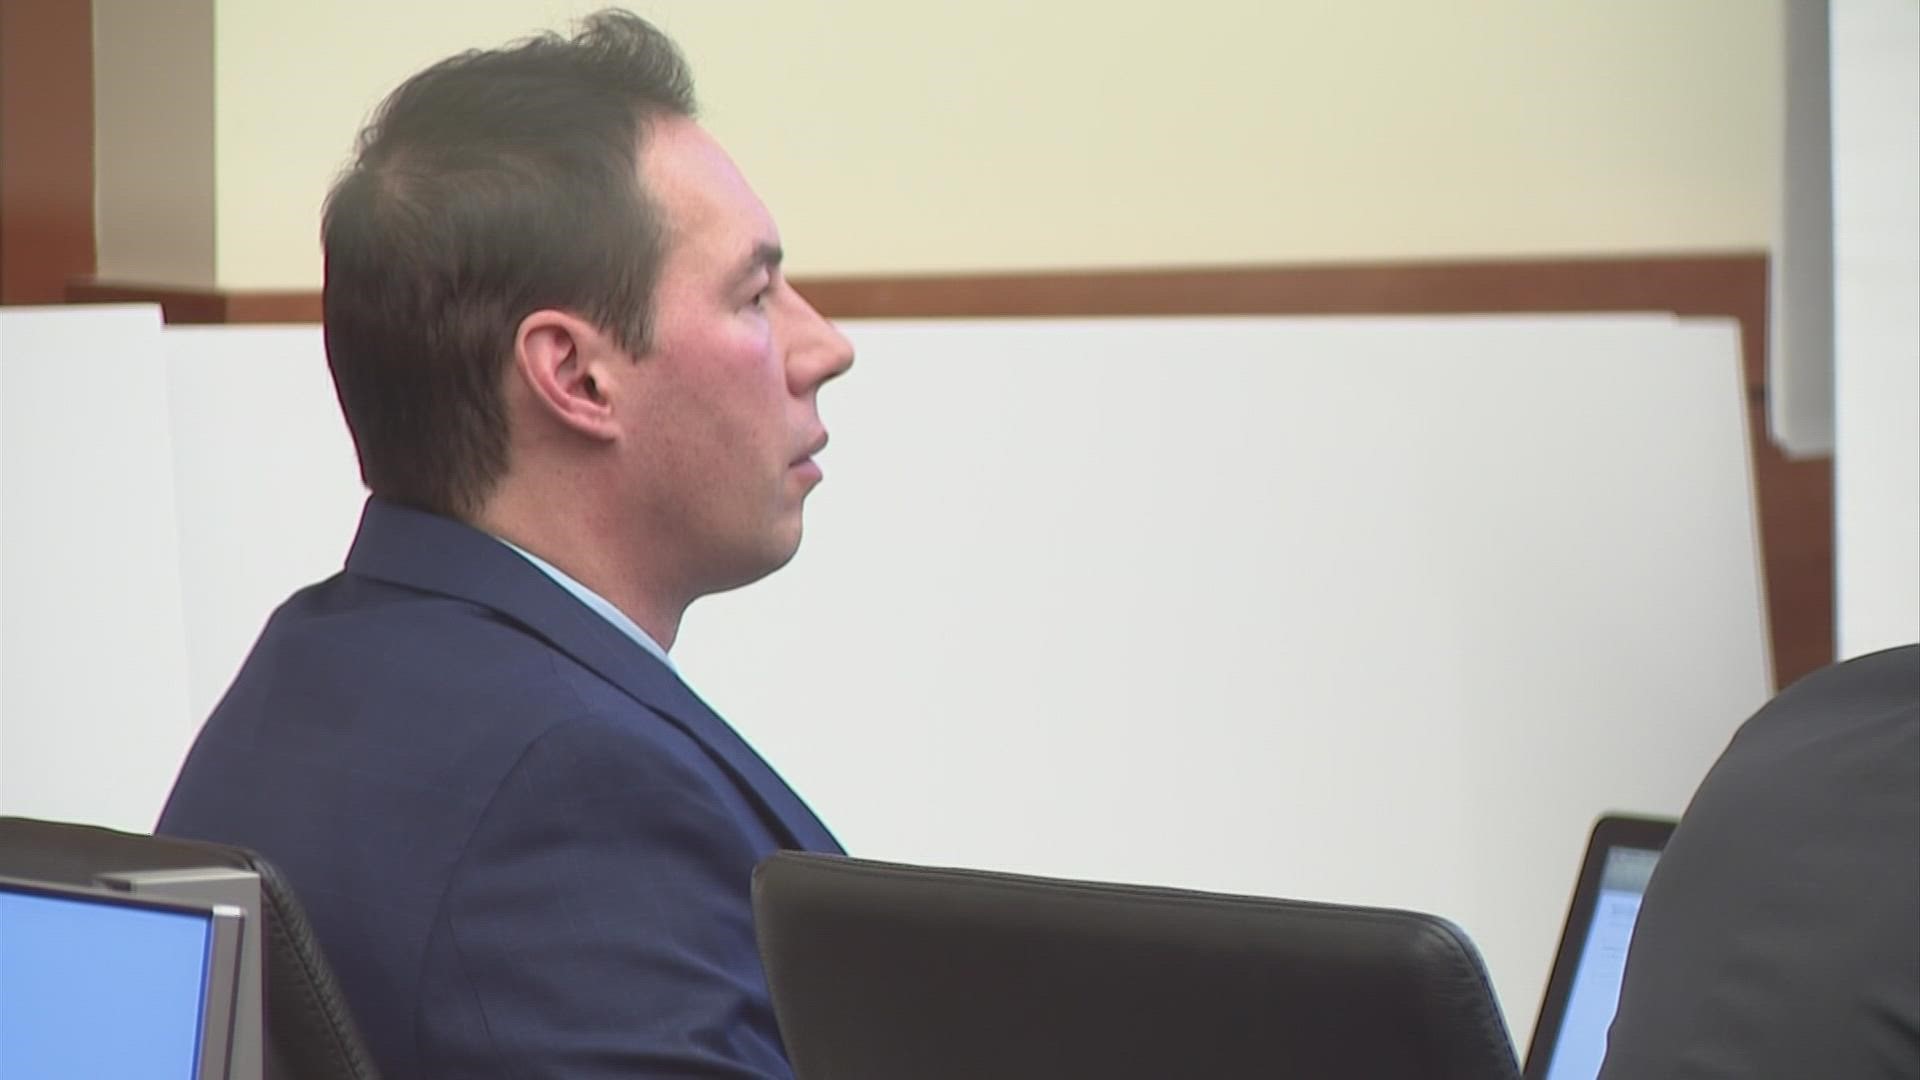 Two former Mount Carmel nurses testified Monday that they asked questions about Dr. William Husel’s medication orders.